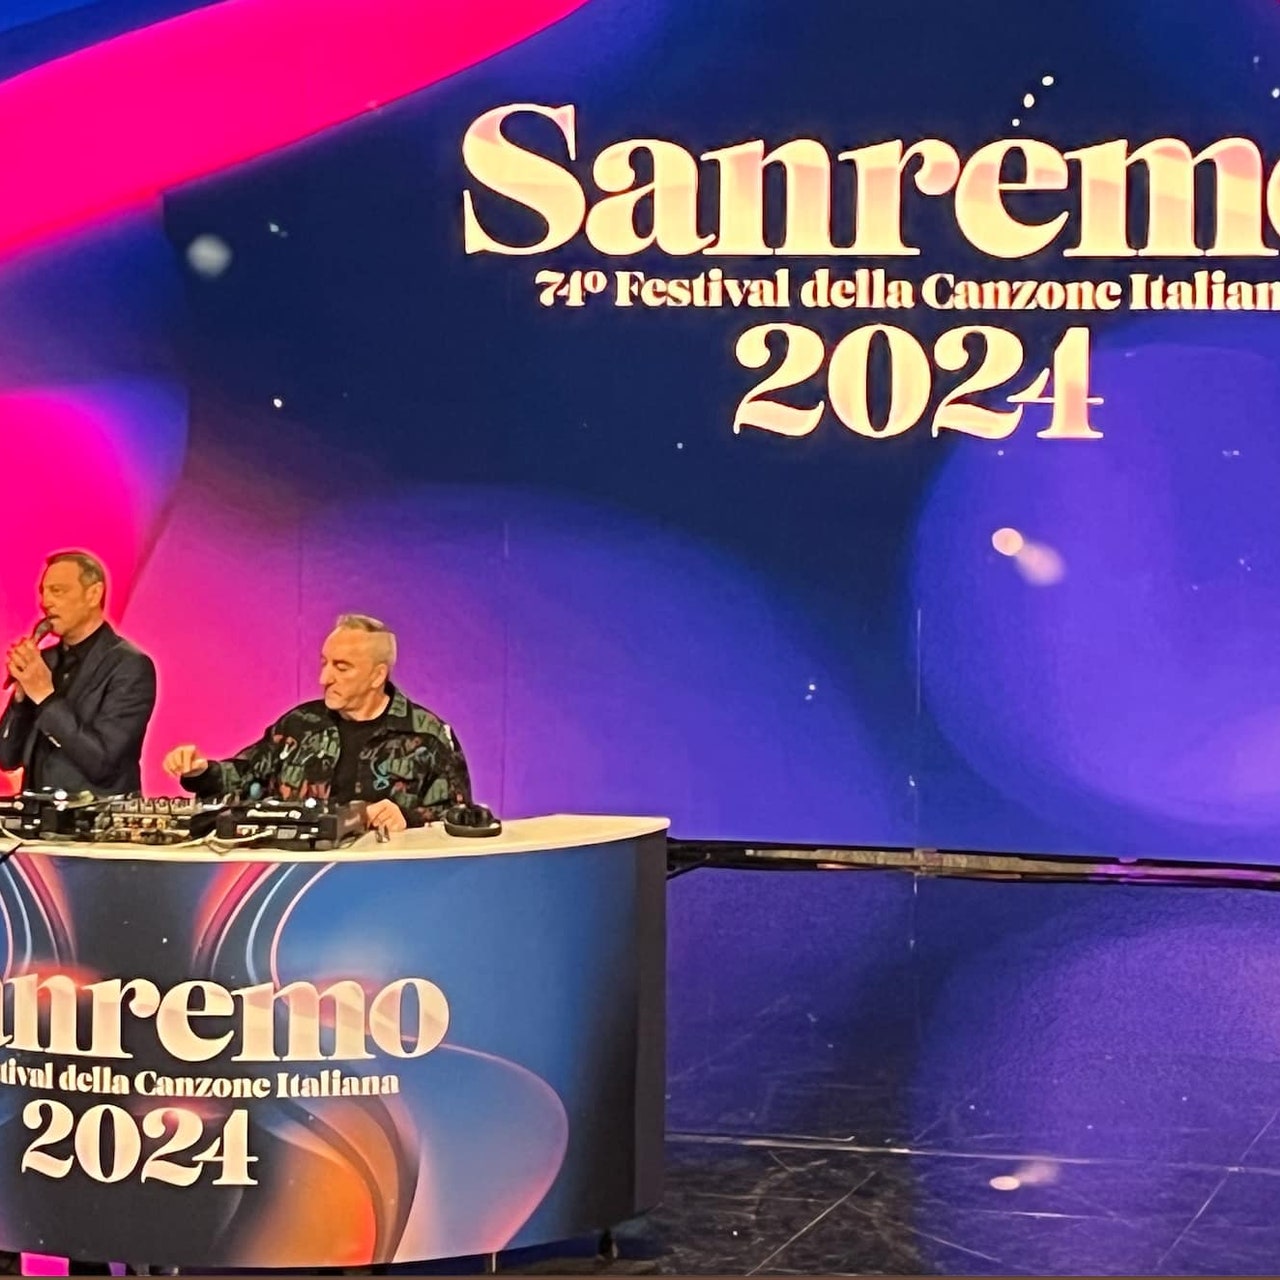 Sanremo 2024, everything you need to know